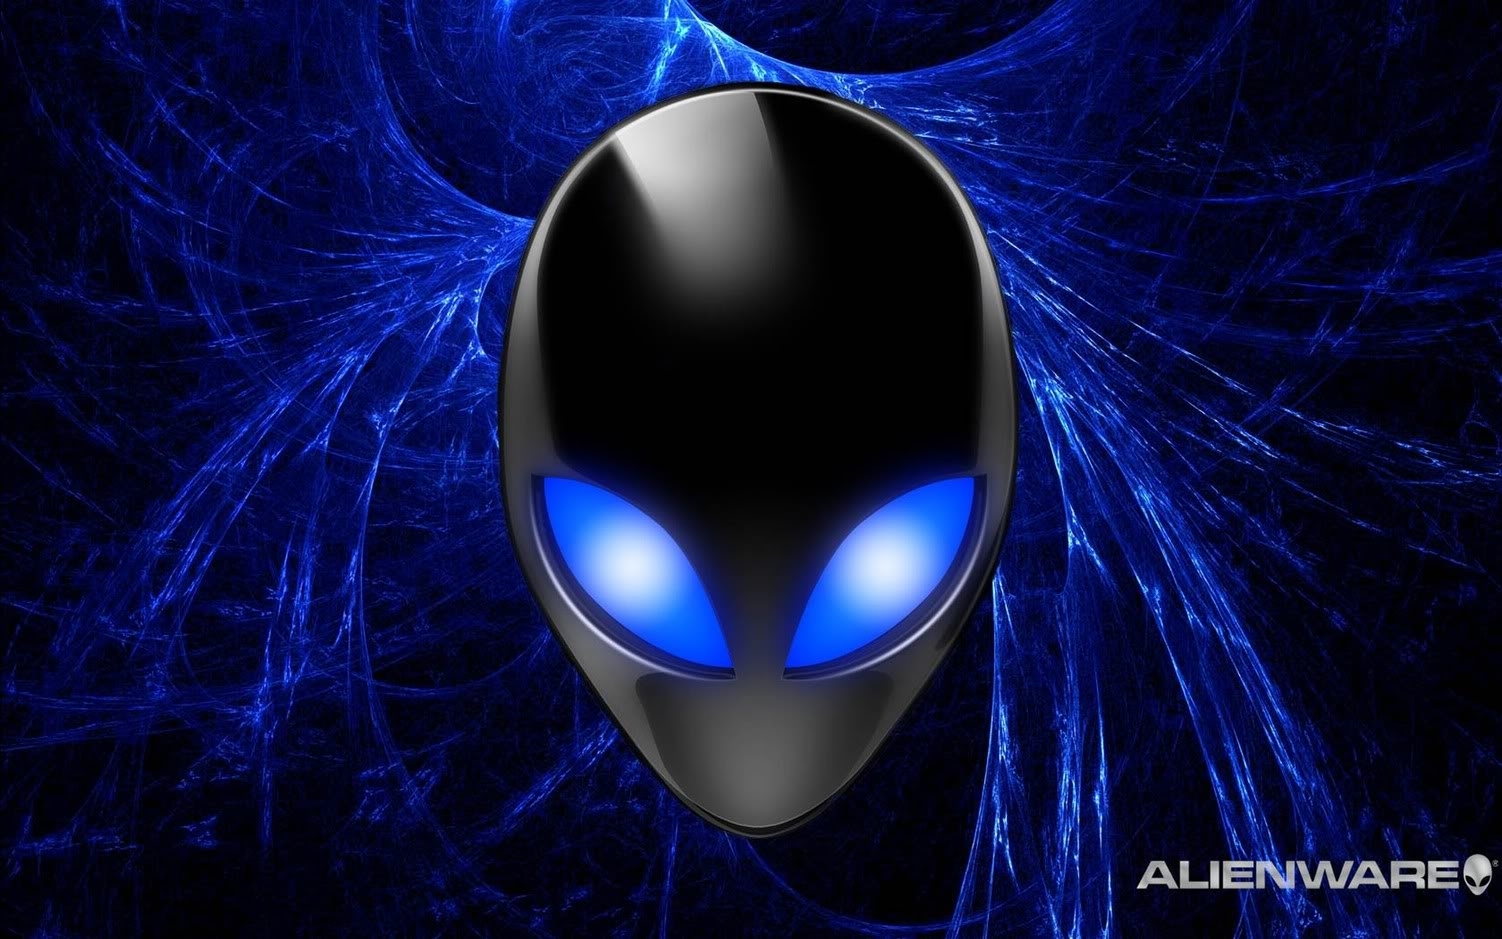 Ufo Amp Aliens Image Alien Ware HD Wallpaper And Background